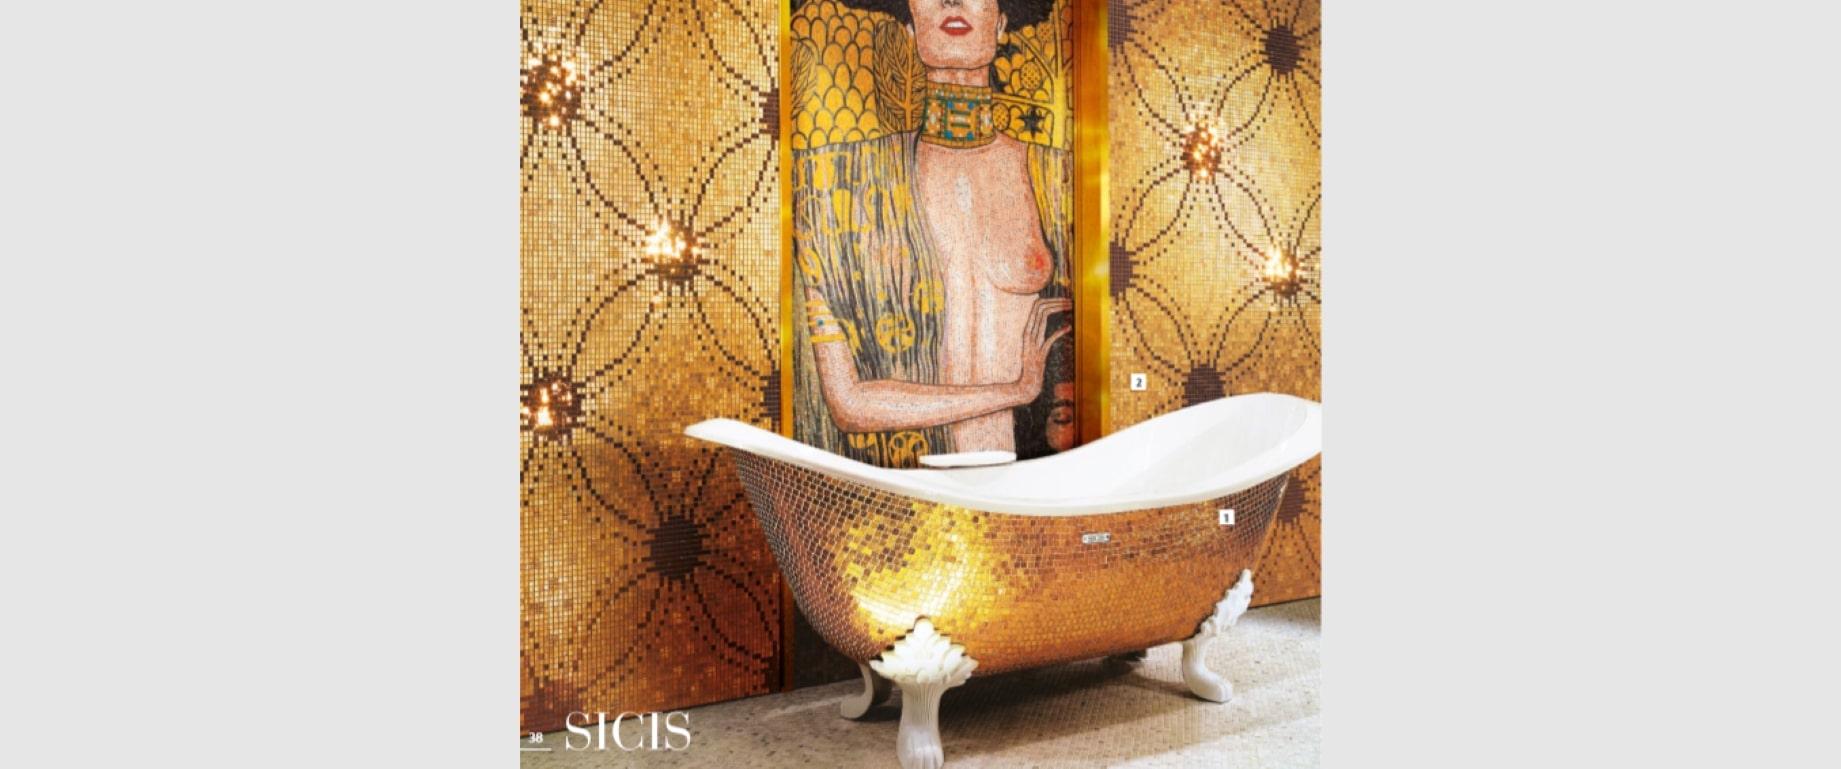 Sicis is delighted to welcome you at ‘Home’.
The classically inspired extent in contemporary plays an eclectic style, elegant and refined. Interiors express personality.
A constant research, attention to quality, use of selected materials and